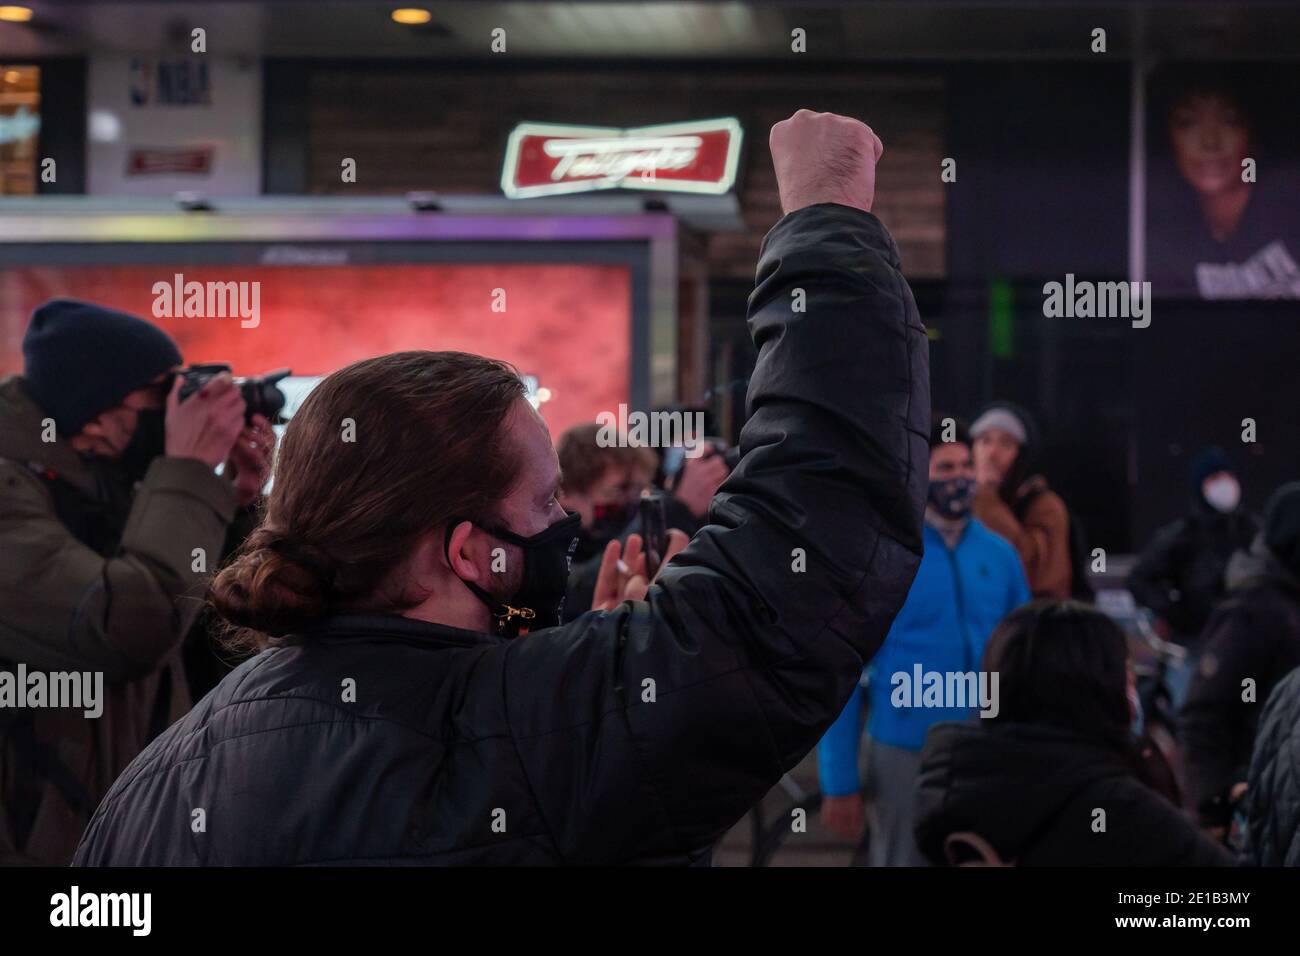 NEW YORK, NY - JANUARY 5: A protestor rise his fist as protester gather in Times Square on January 5, 2021 in New York City.  A small group of 20 protestors march after the announcement in the Jacob Blake case.  Kenosha County District Attorney Michael Graveley announced Tuesday that Rusten Sheskey, a White Police Officer, who shot Jacob Blake, a 29-year-old Black man, seven times in the back while responding to a domestic incident on August 23, 2020, will not face charges in the shooting. Credit: Ron Adar/Alamy Live News Stock Photo